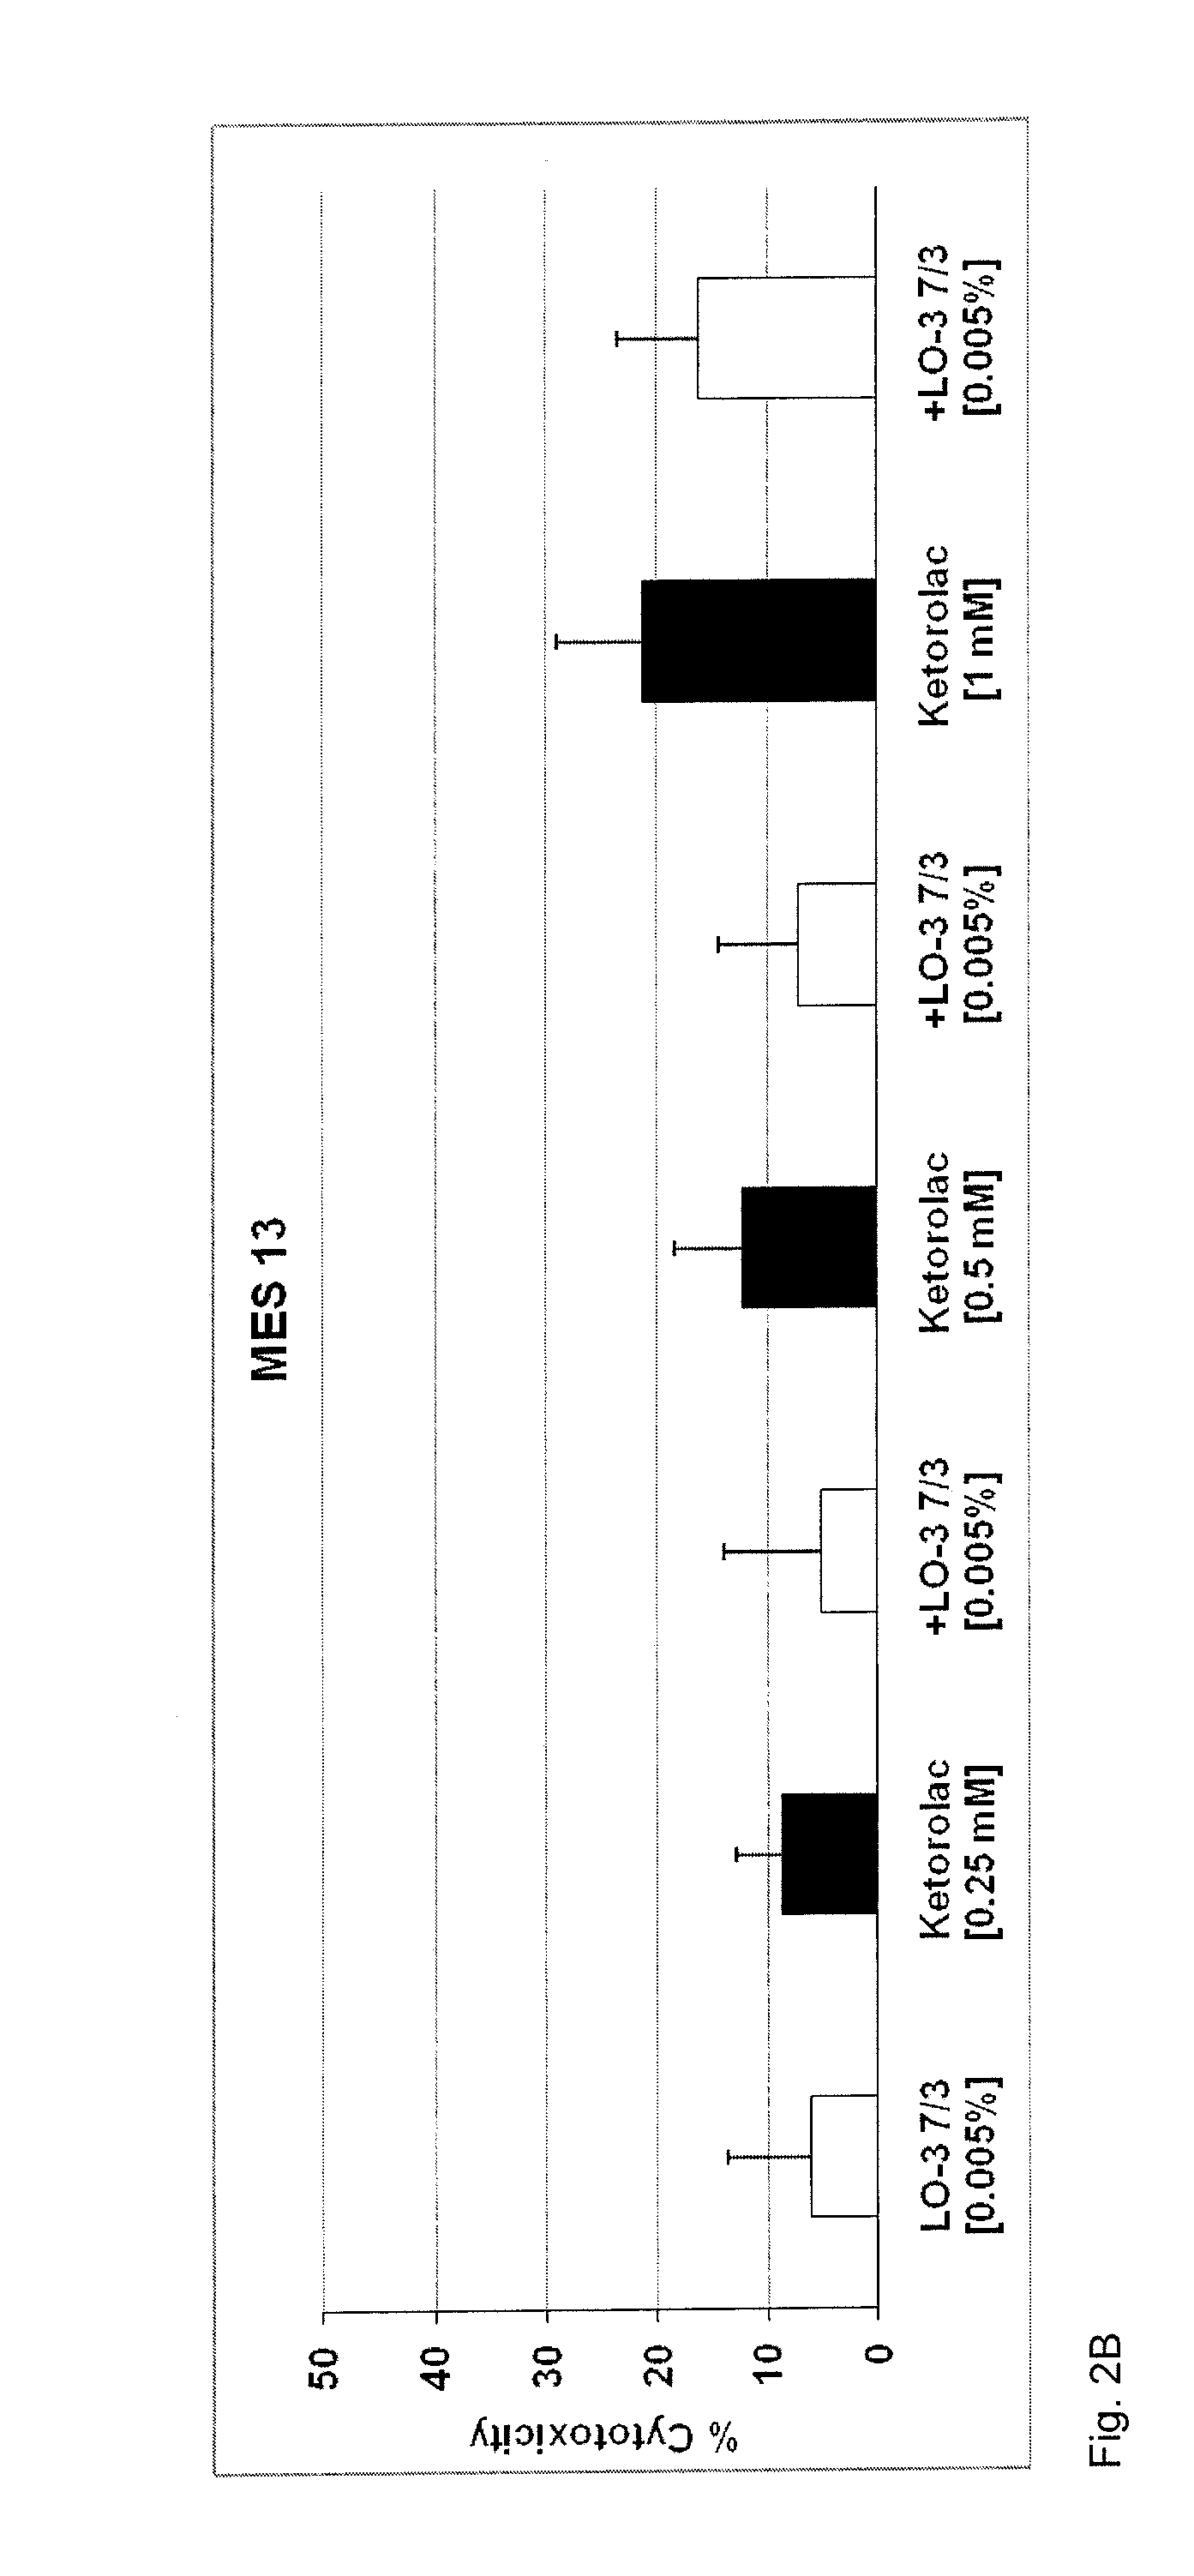 Method of mitigating adverse drug events using omega-3 fatty acids as a parenteral therapeutic drug vehicle